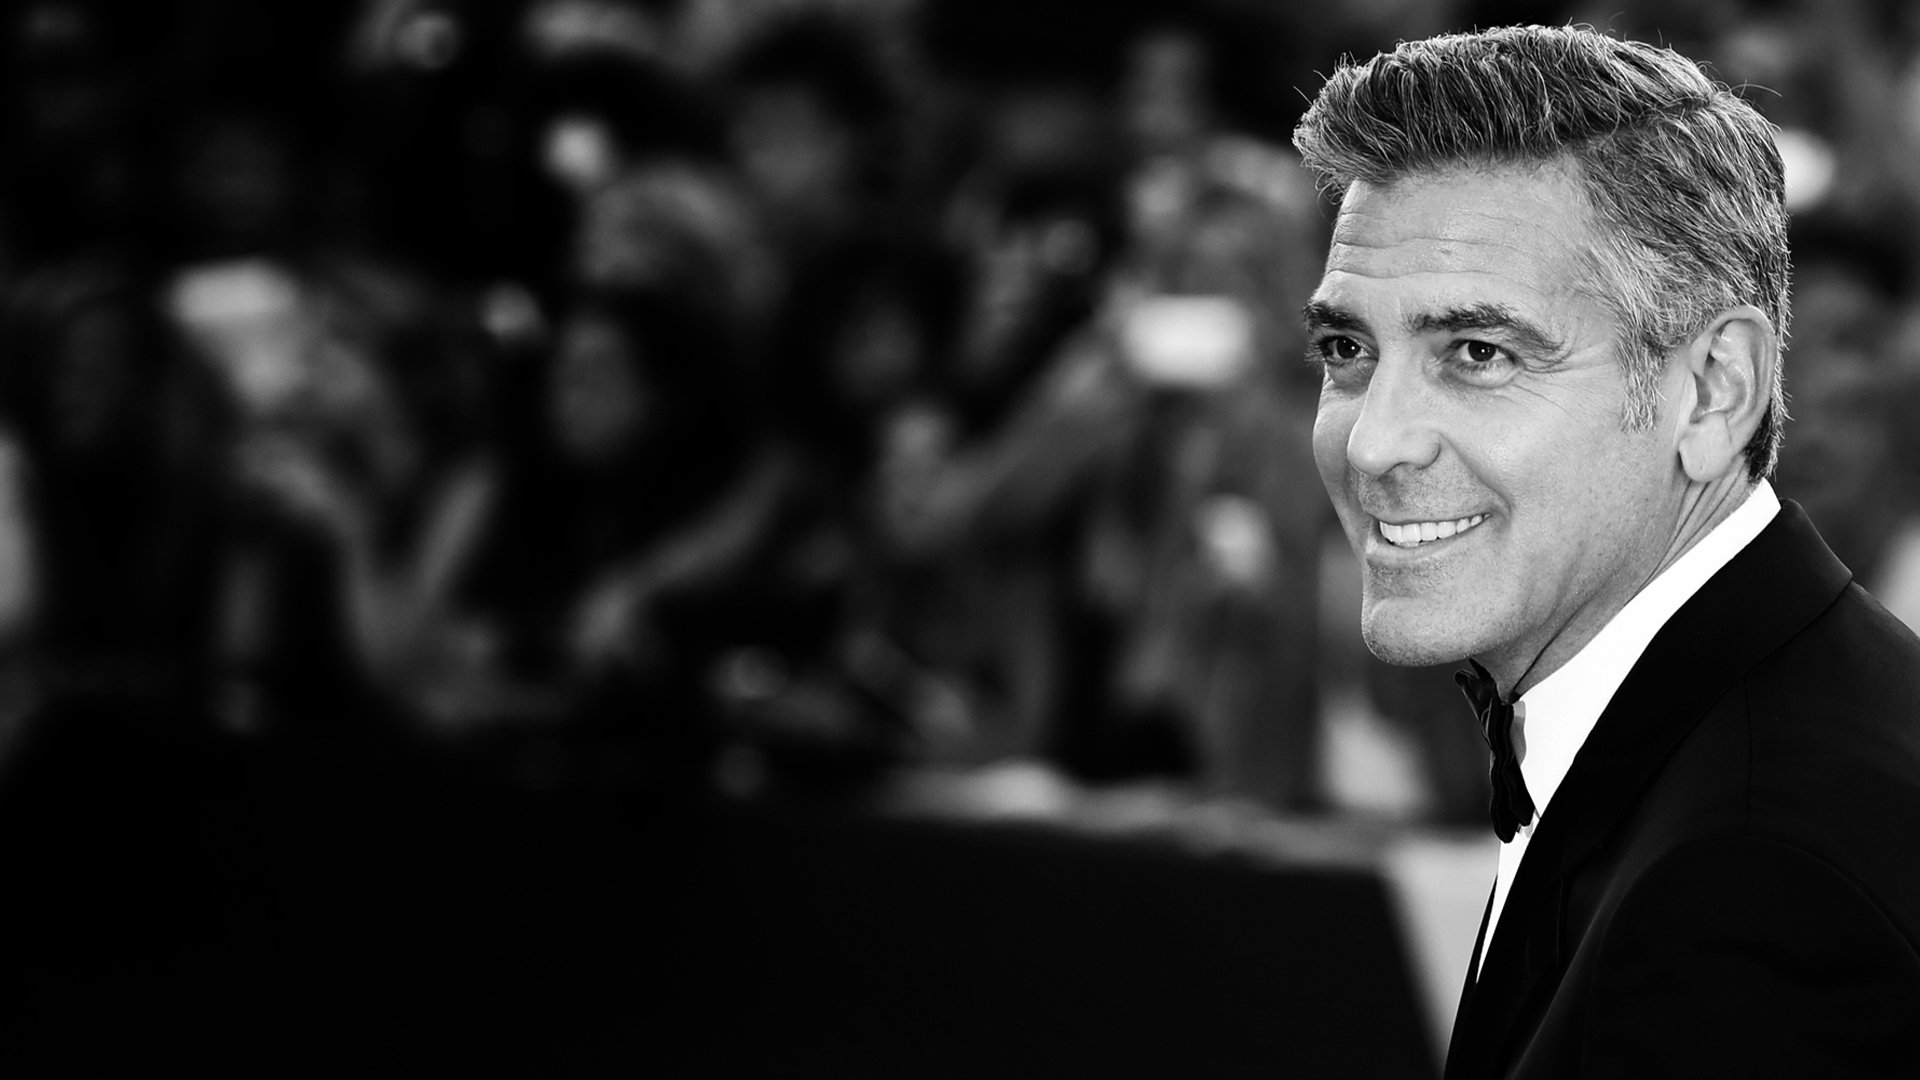 George Clooney and his charming smile   George Clooney Wallpaper